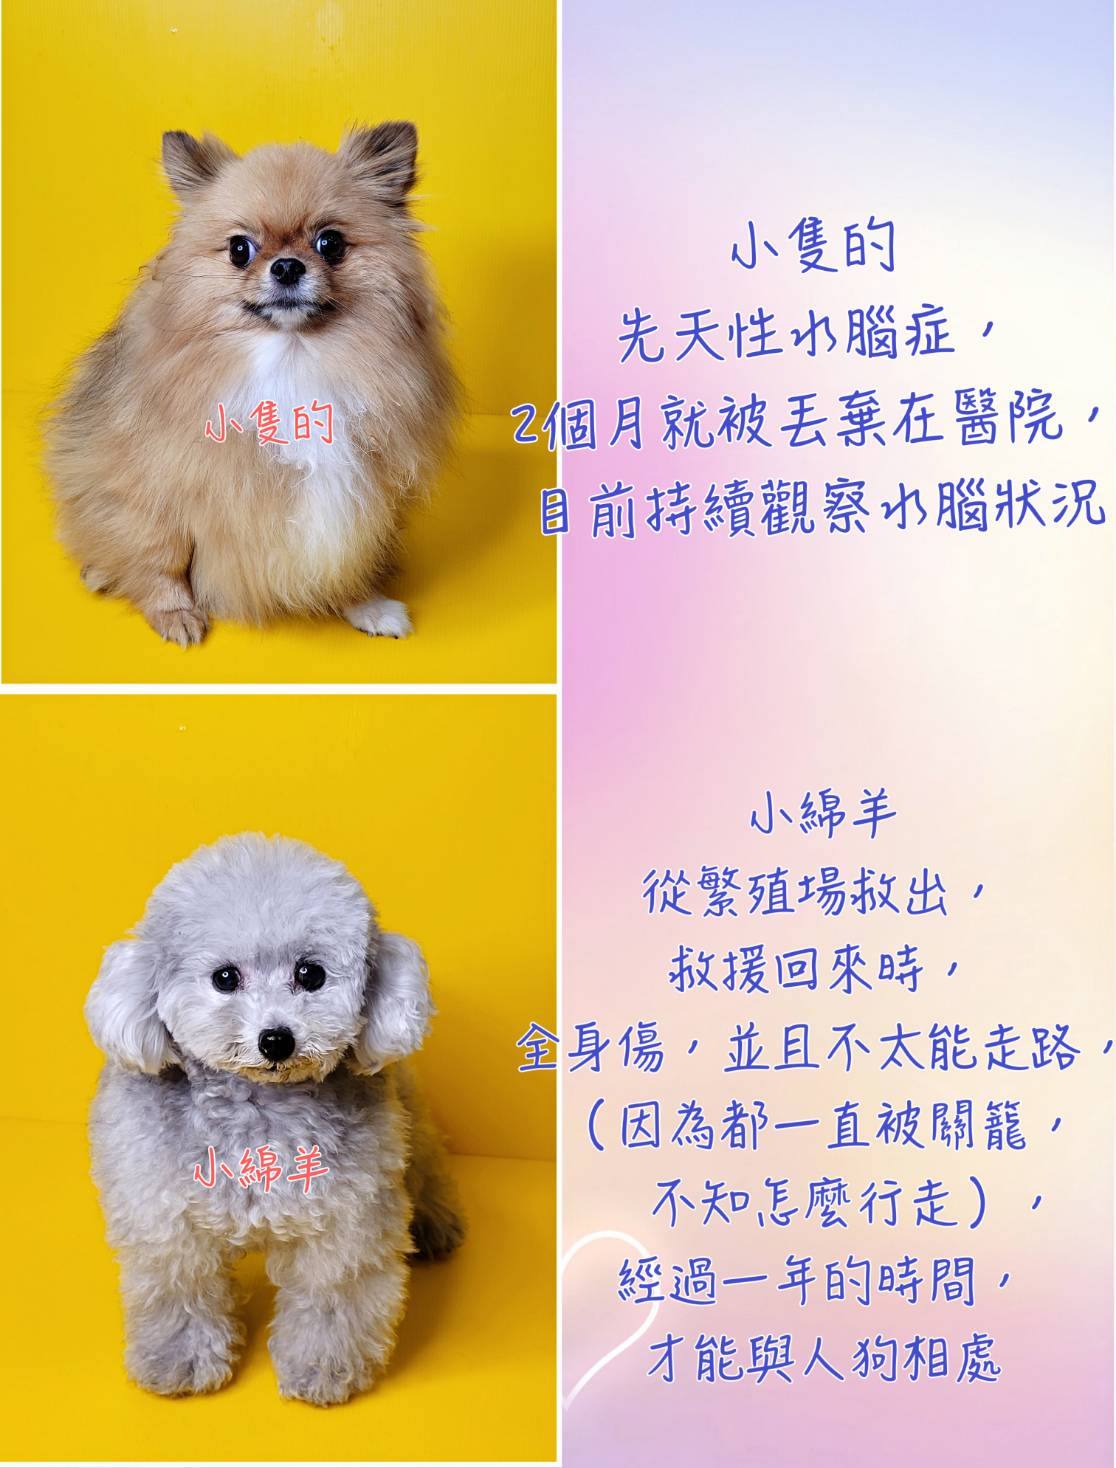 The cute dogs at the party have had a miserable past. (Photo / Provided by Show Lo)